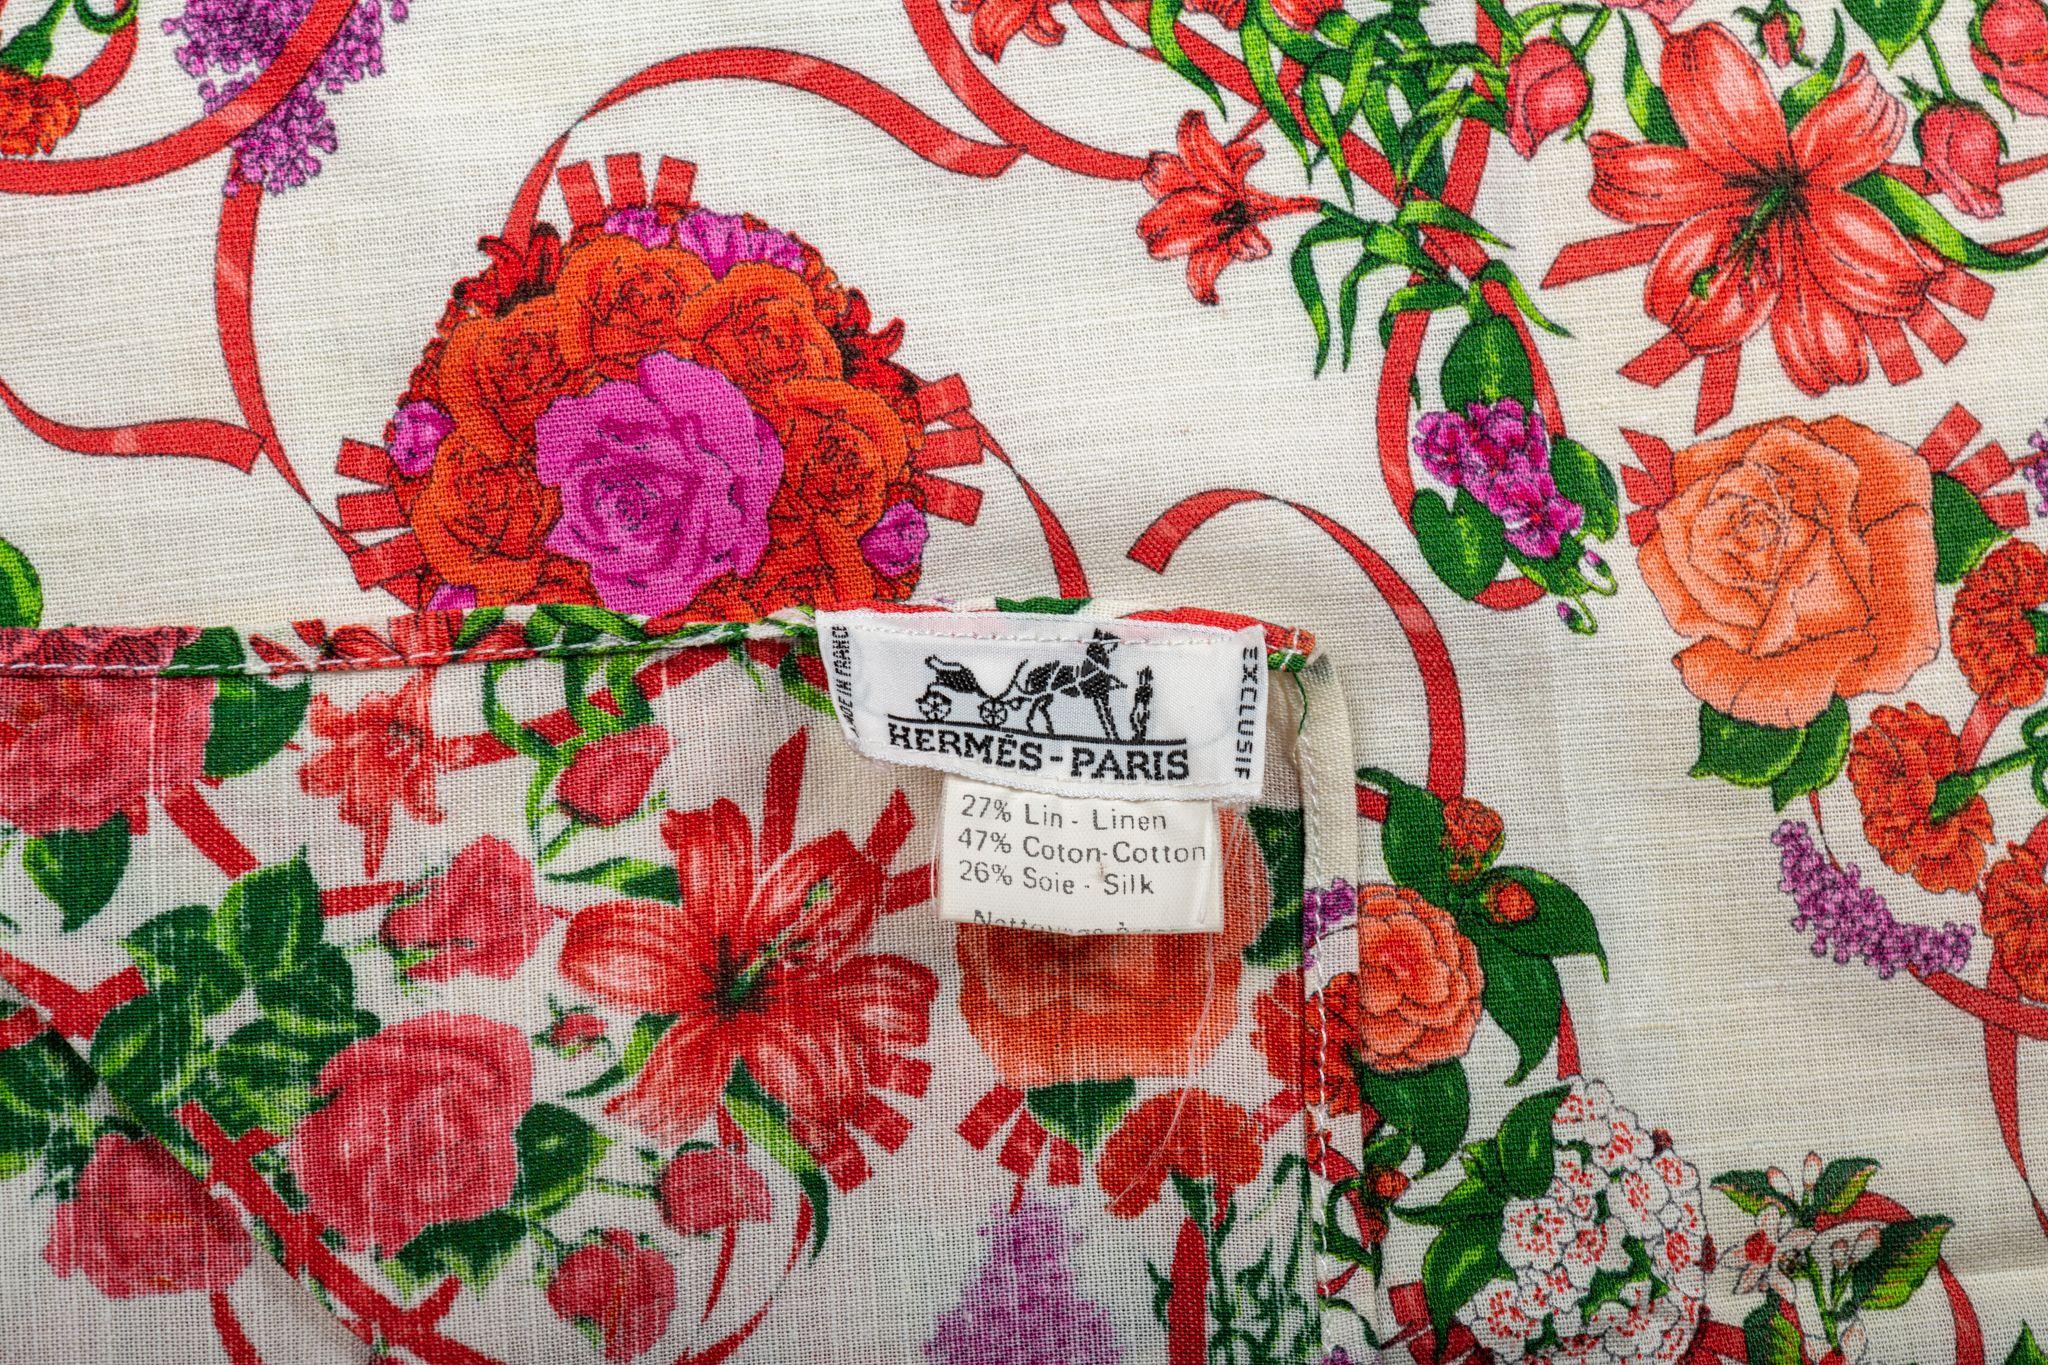 Hermès Vintage Flower Sarong Linen Silk In Excellent Condition For Sale In West Hollywood, CA